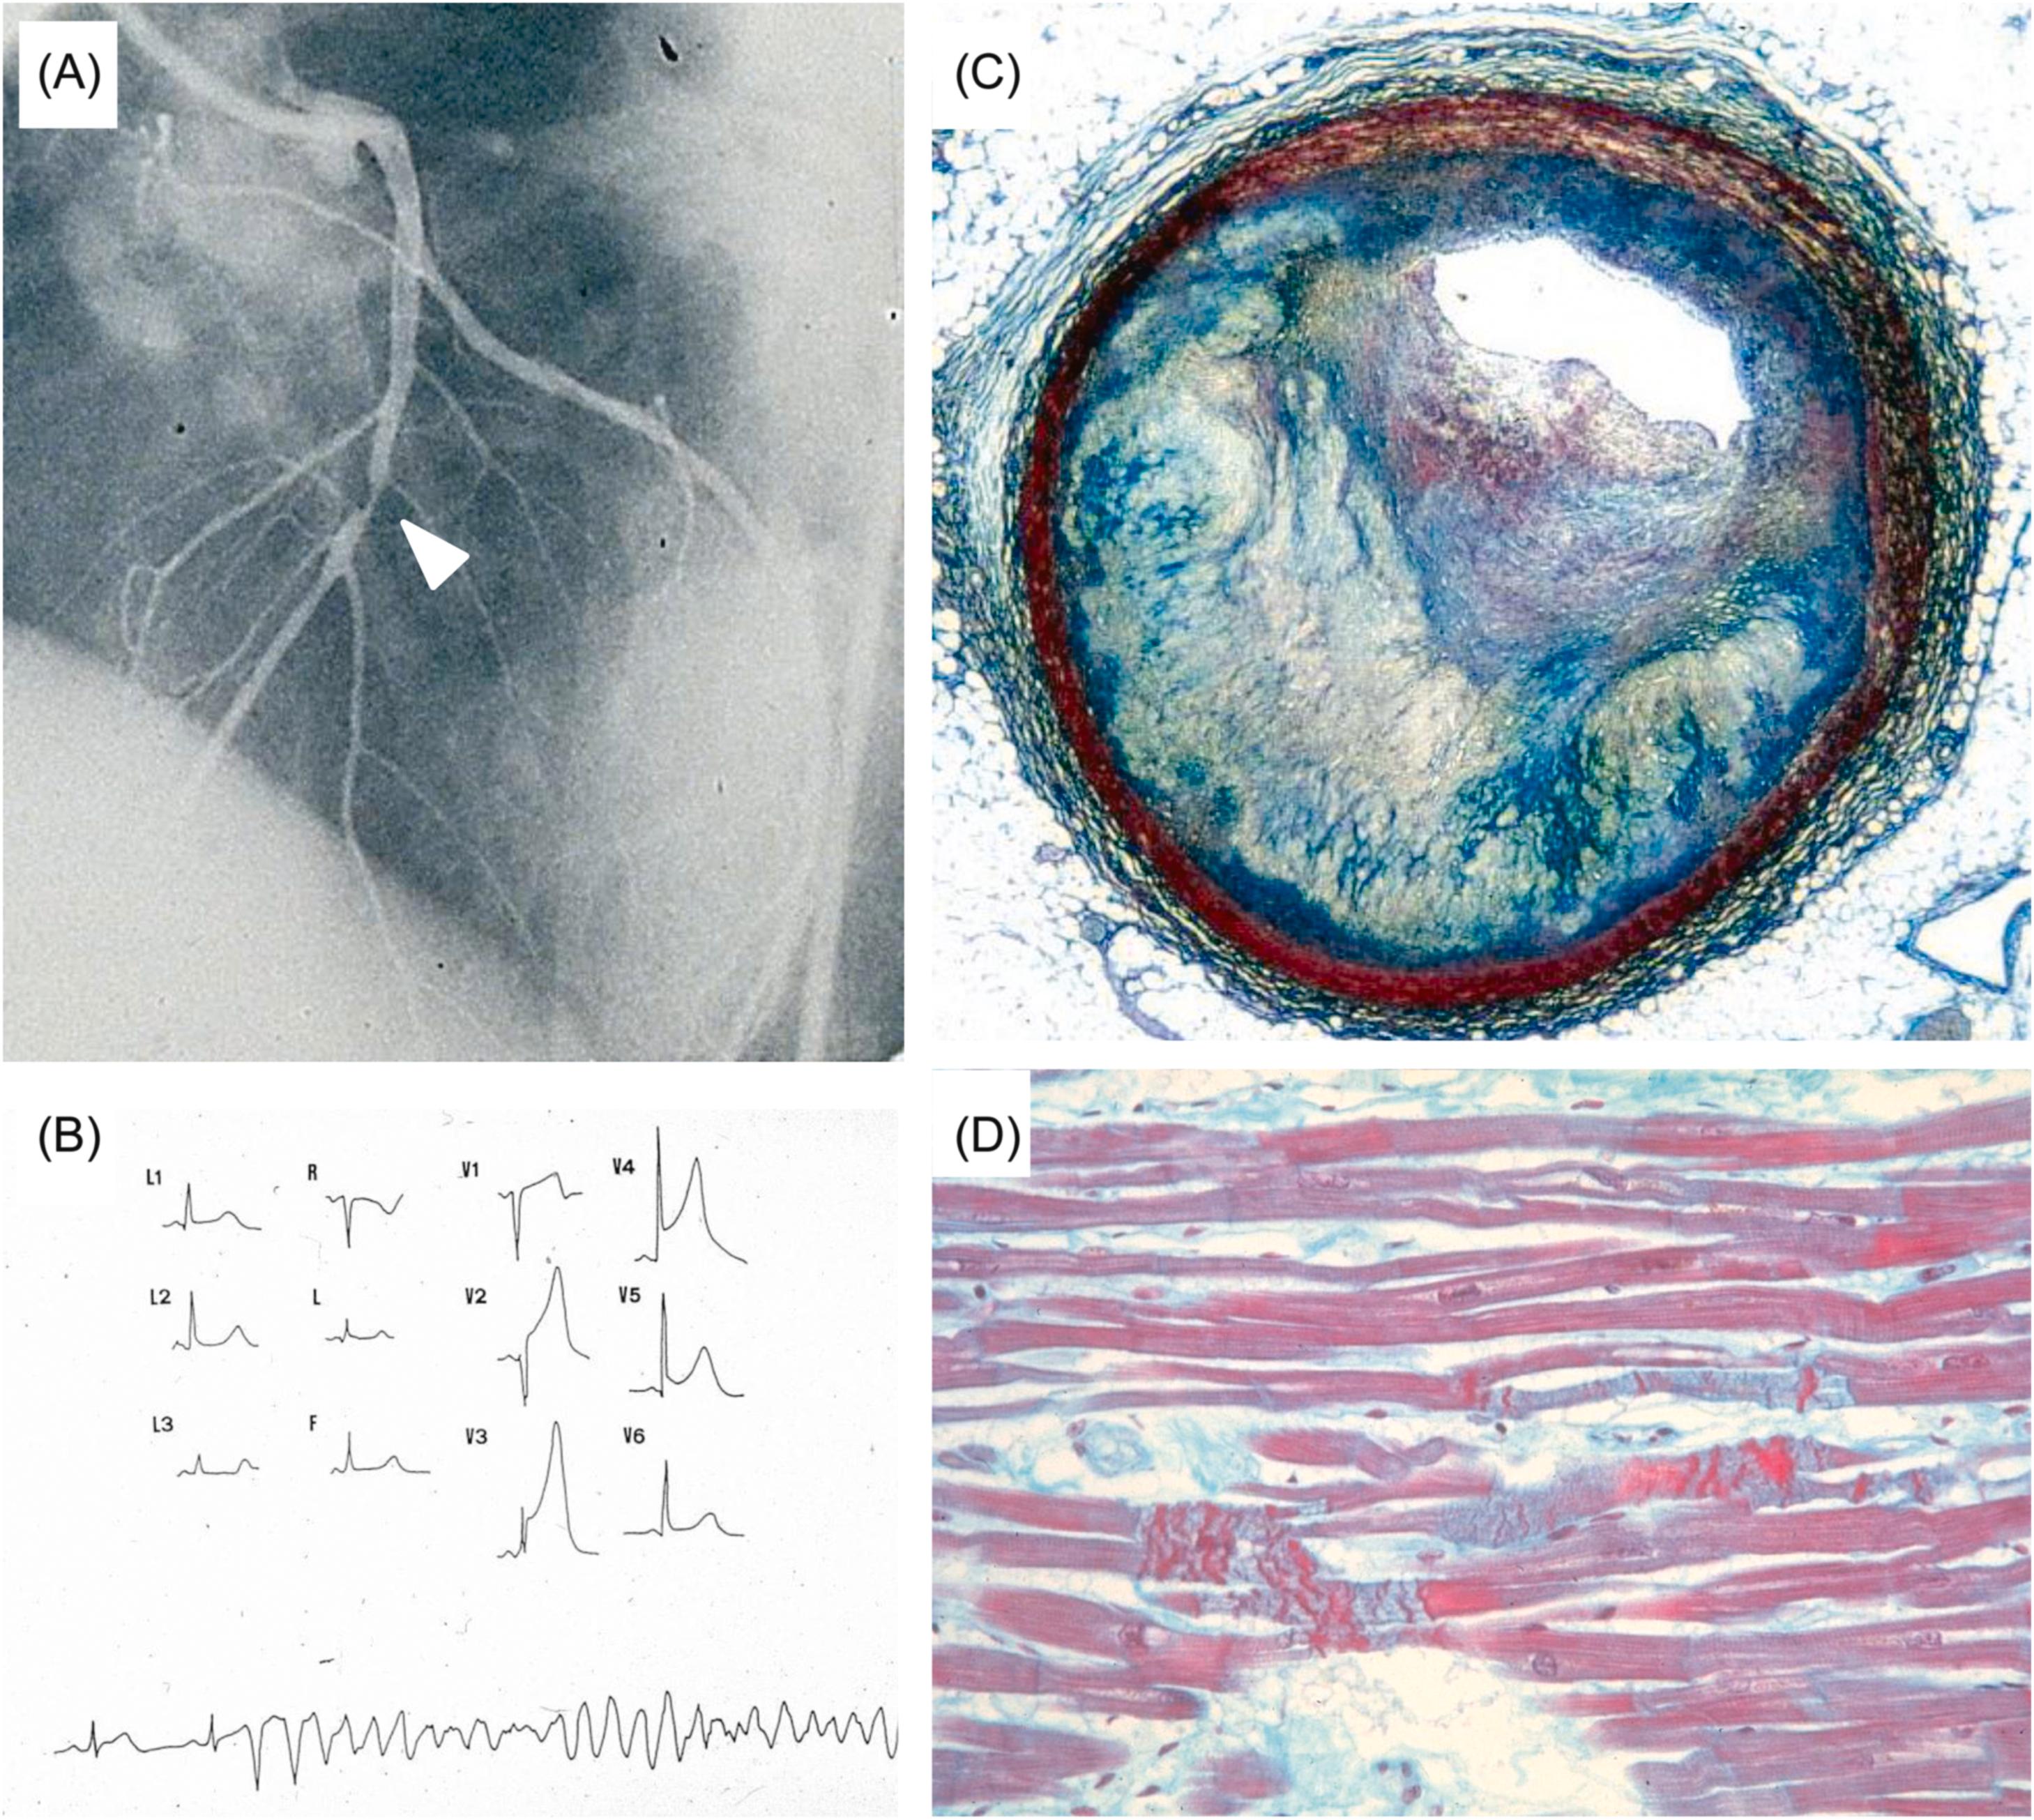 Figure 11.19, Arrhythmic sudden cardiac death in a 45-year-old man with Prinzmetal’s variant angina. (A) Selective left coronary angiography showing a single eccentric obstructive plaque in the mid segment of the left anterior descending coronary artery ( arrow head ). (B) Electrocardiographic tracing showing marked ST segment elevation followed by ventricular fibrillation. (C) Histology demonstrating atherosclerotic plaque with severe eccentric stenosis and intimal proliferation of the left anterior descending coronary artery. (D) Early signs of ischemic injury with contraction band necrosis, in keeping with transient ischemia and reperfusion injury (C and D, Heidenhain trichrome).